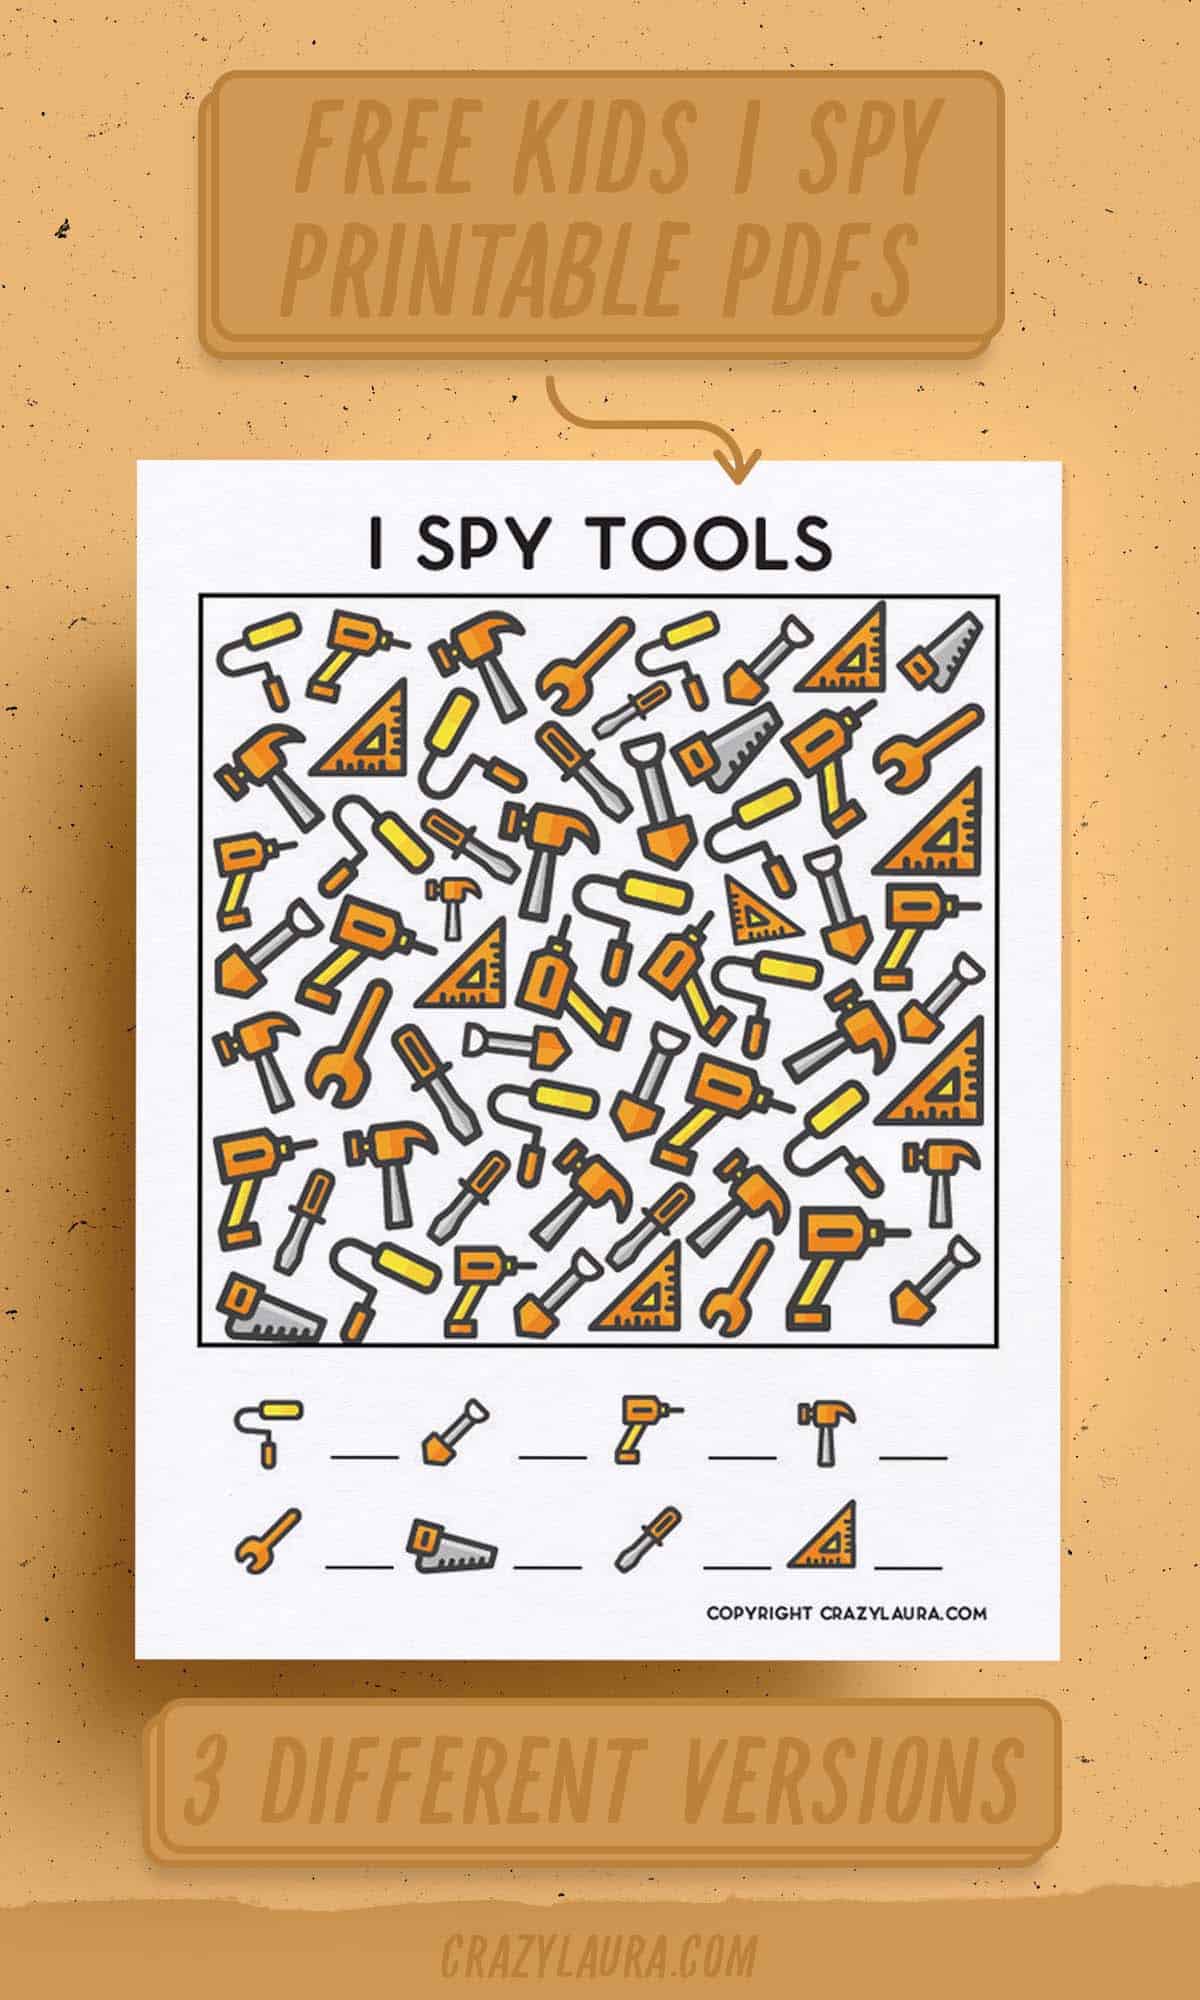 i spy activity for kids with tools